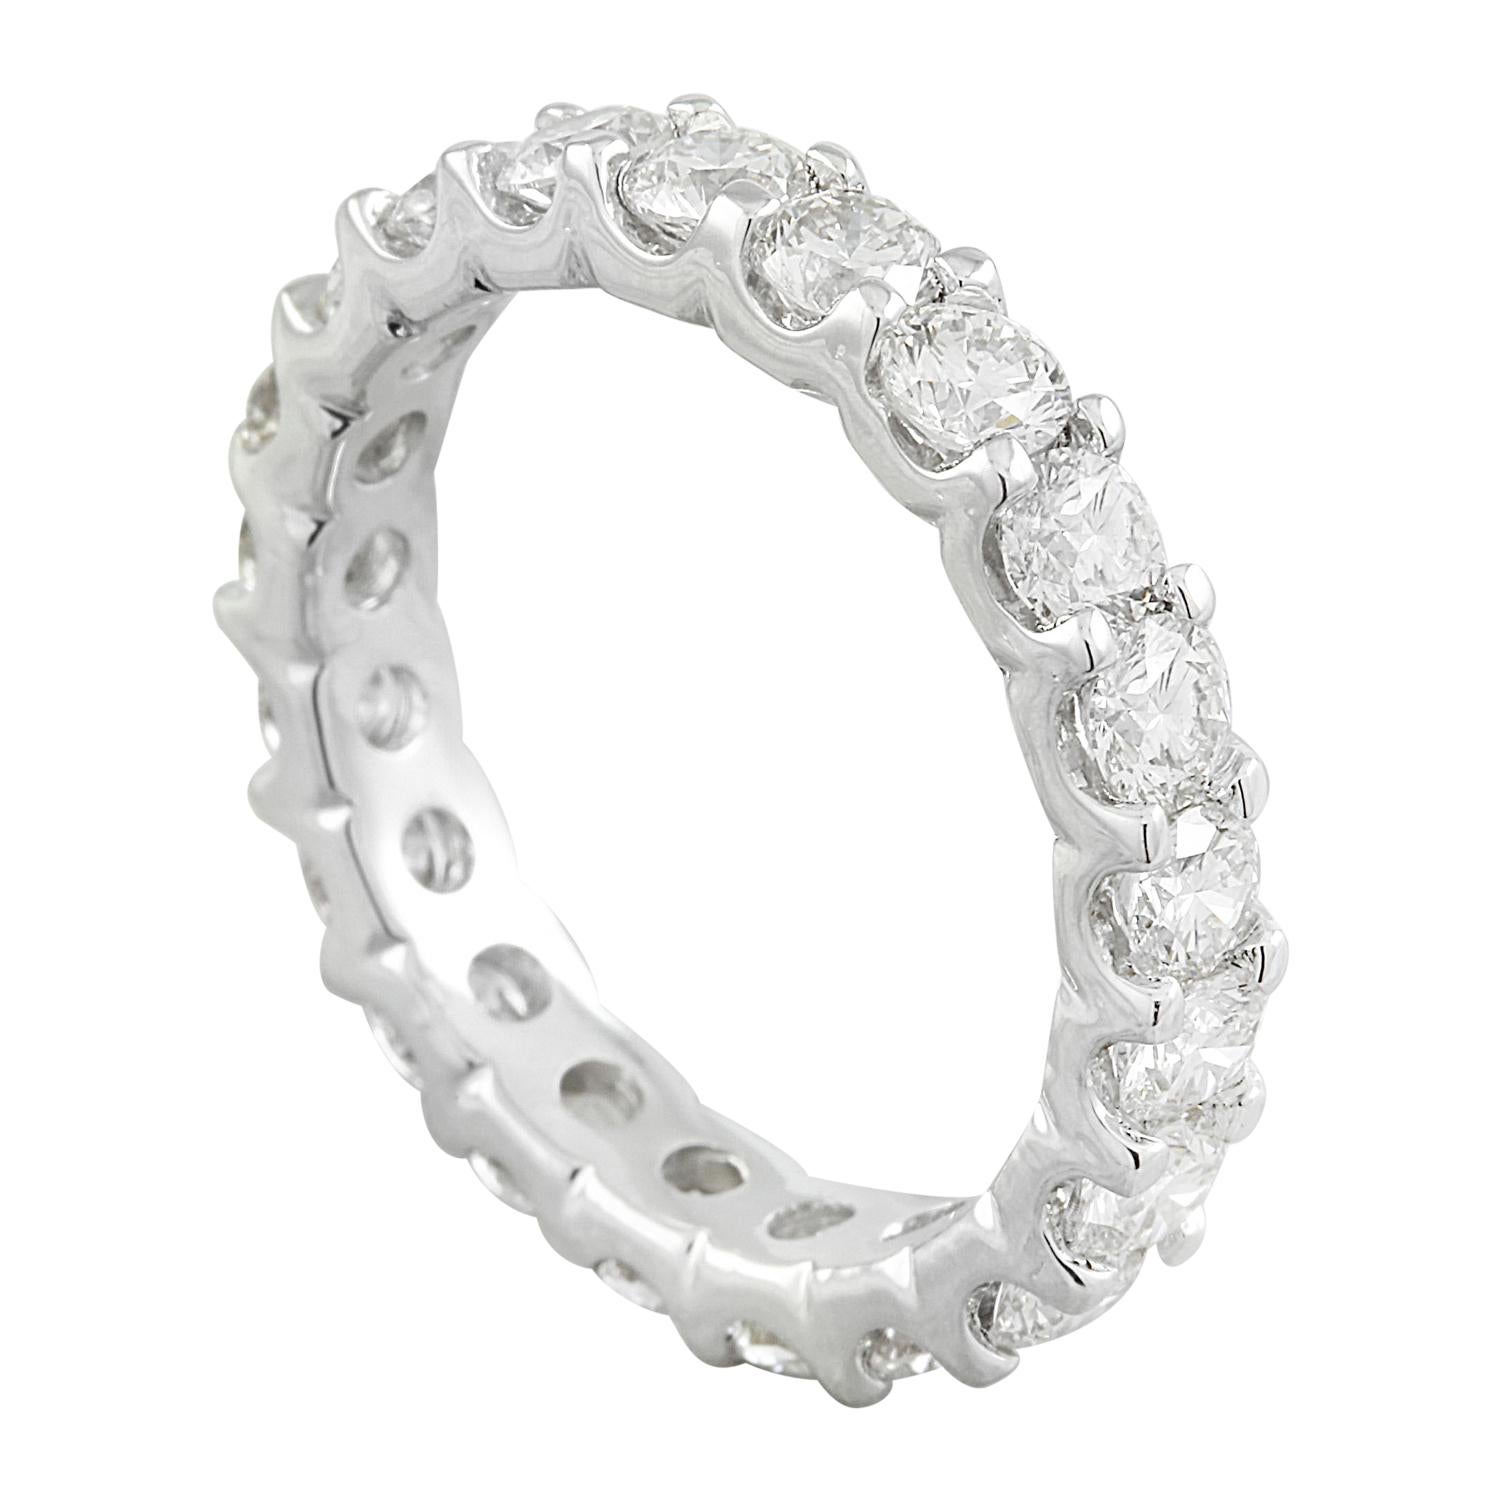 Introducing an extraordinary masterpiece of elegance and sophistication - the 2.78 Carat Natural Diamond 14K Solid White Gold Eternity Ring, a pinnacle of luxury craftsmanship for those with discerning taste.

Crafted with exquisite attention to